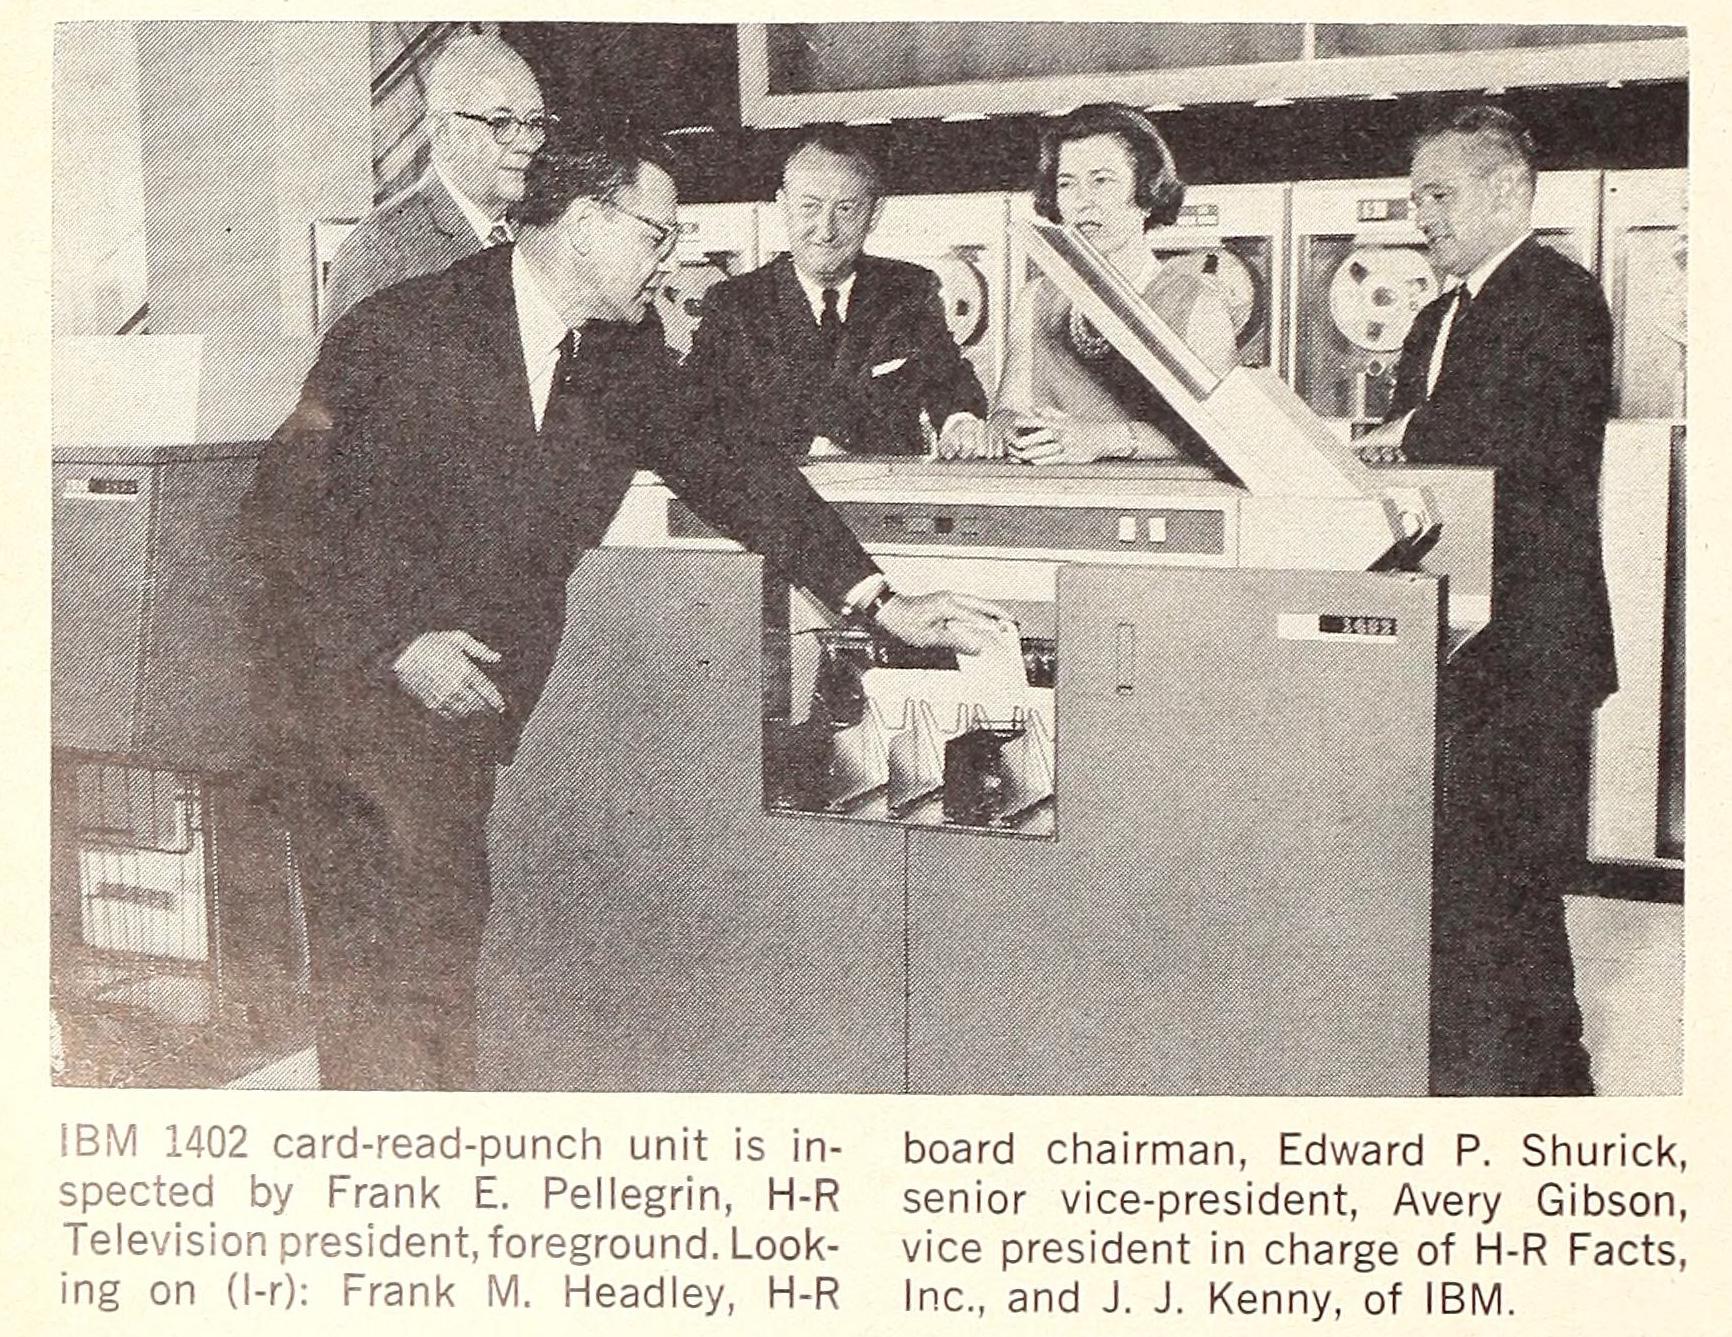 A black and white photo of men in suits and one woman standing around an IBM 1402 punch-card reader. There are large bays of magnetic tape in the backghround.